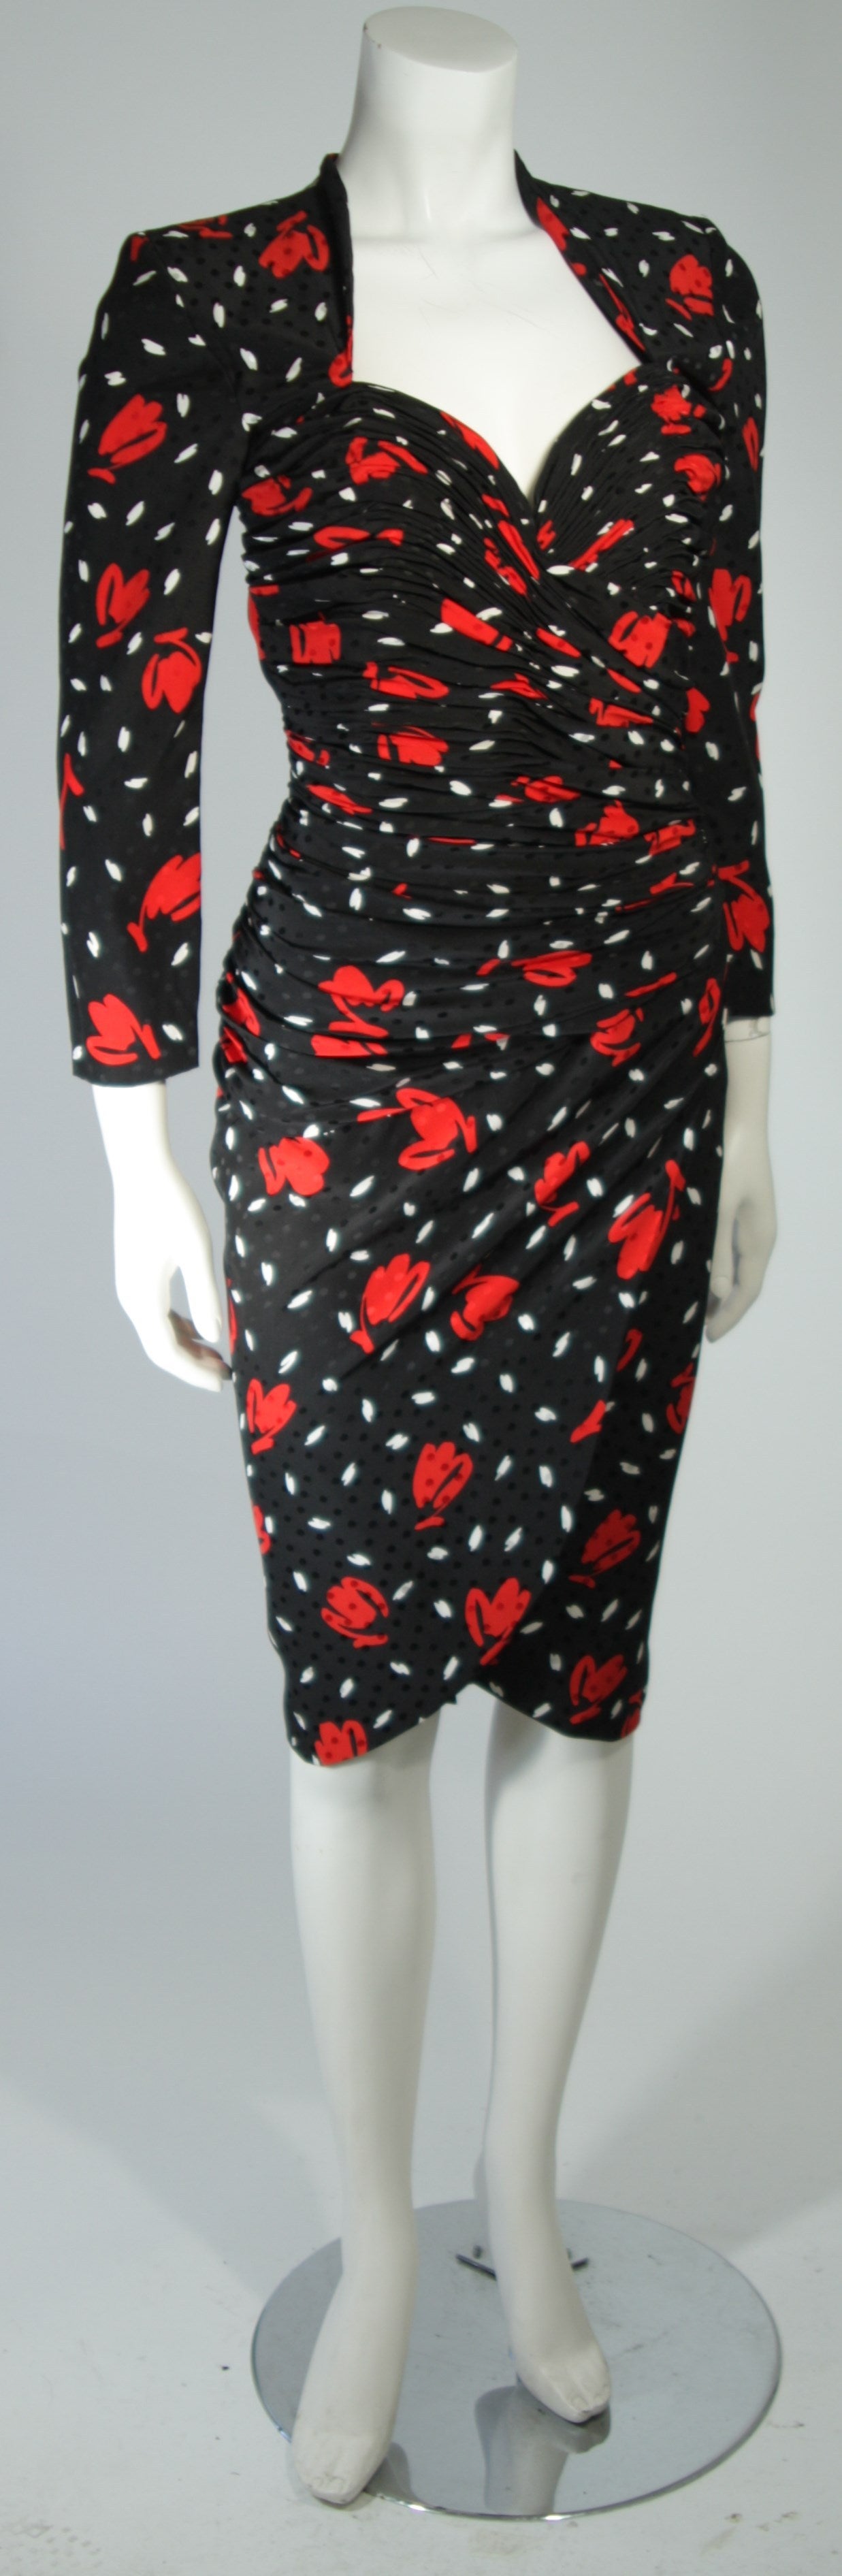 Women's Vintage Black and White Polka Dot Dress with Abstract Rose Size Small